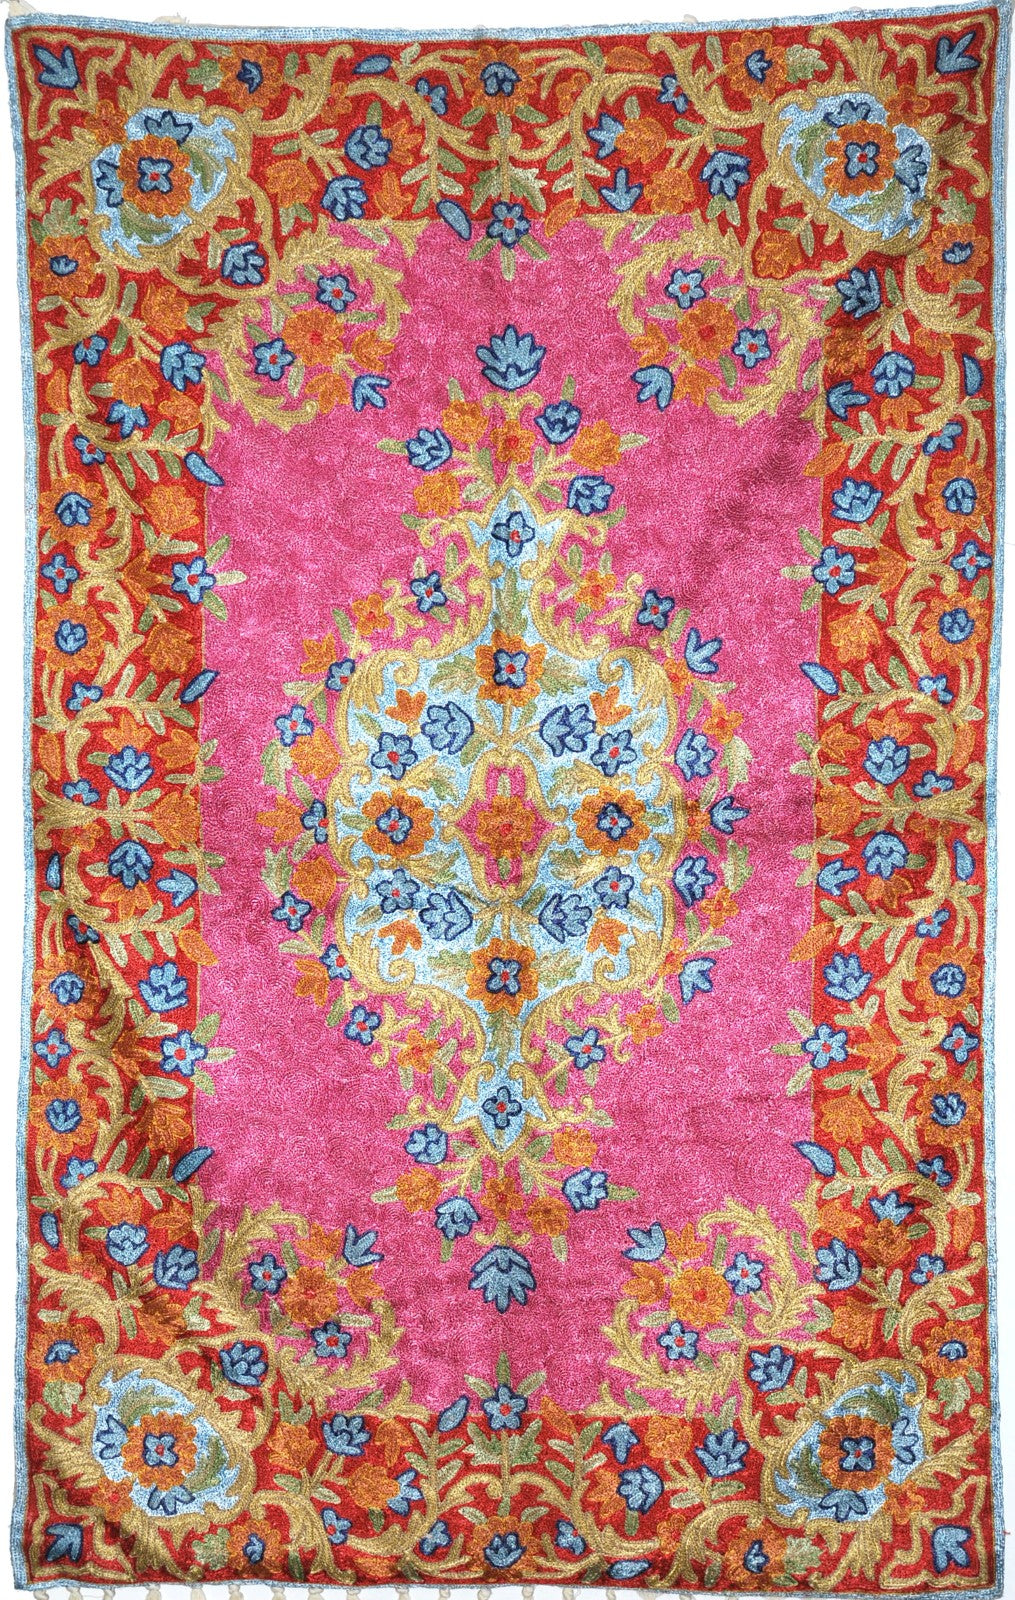 ChainStitch Tapestry Silk Wall Hanging Area Rug, Multicolor Embroidery 2.5x4 feet #CWR10108